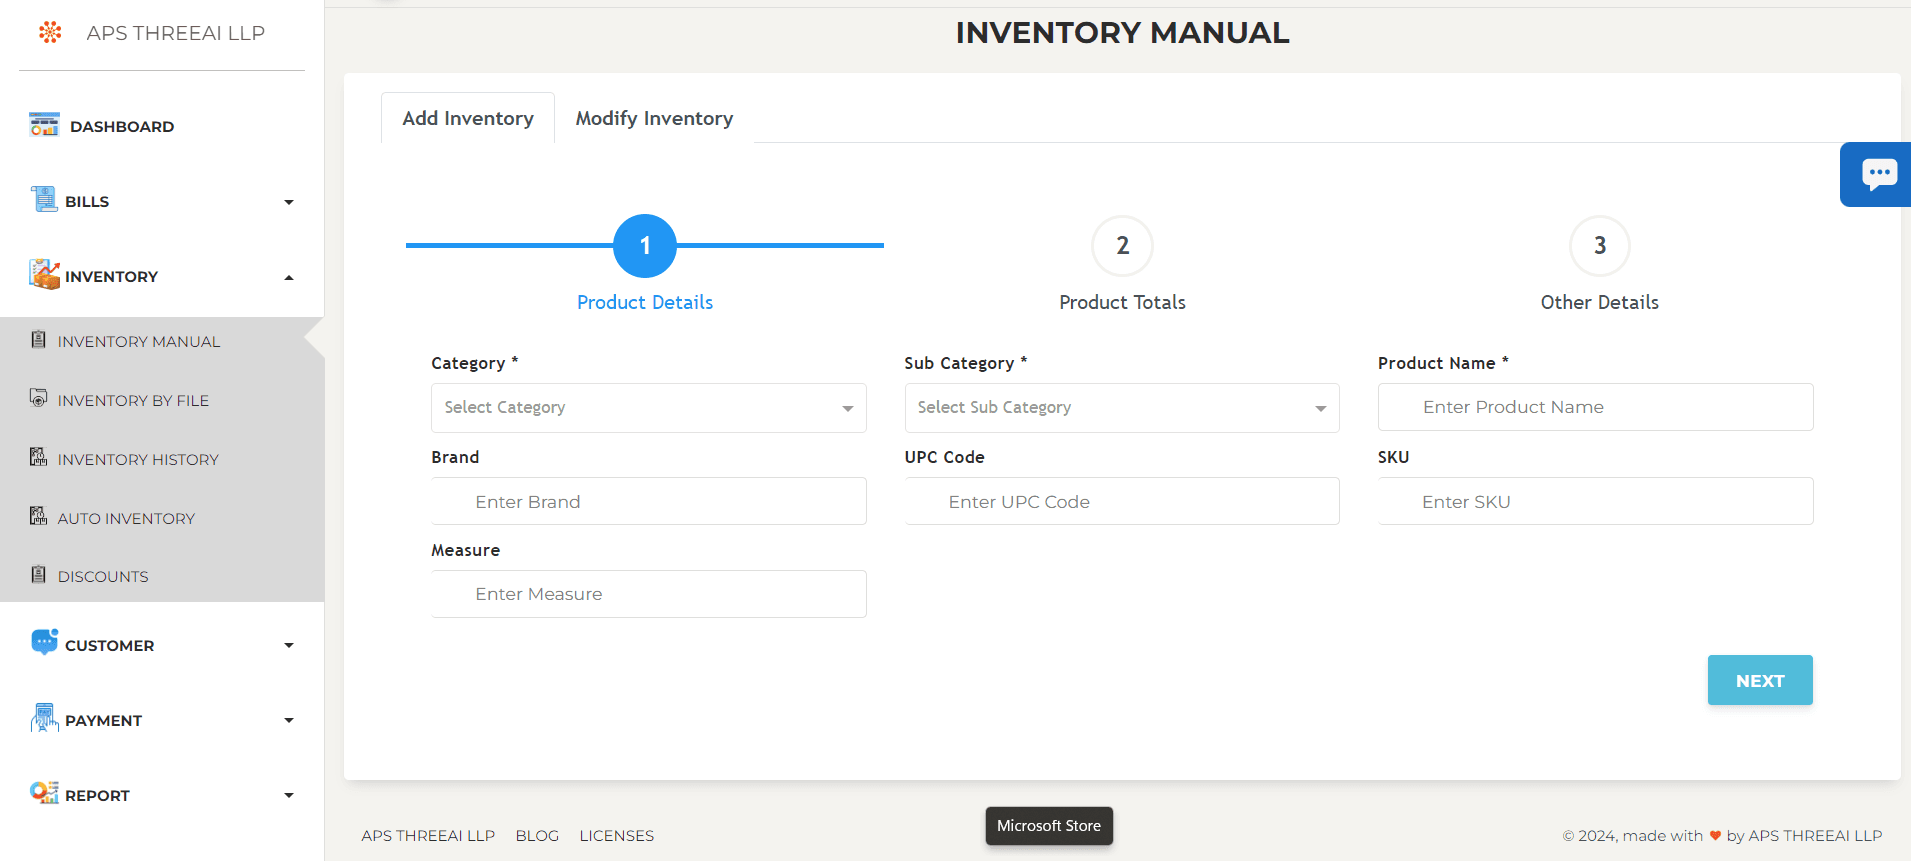 Inventory on your fingertips